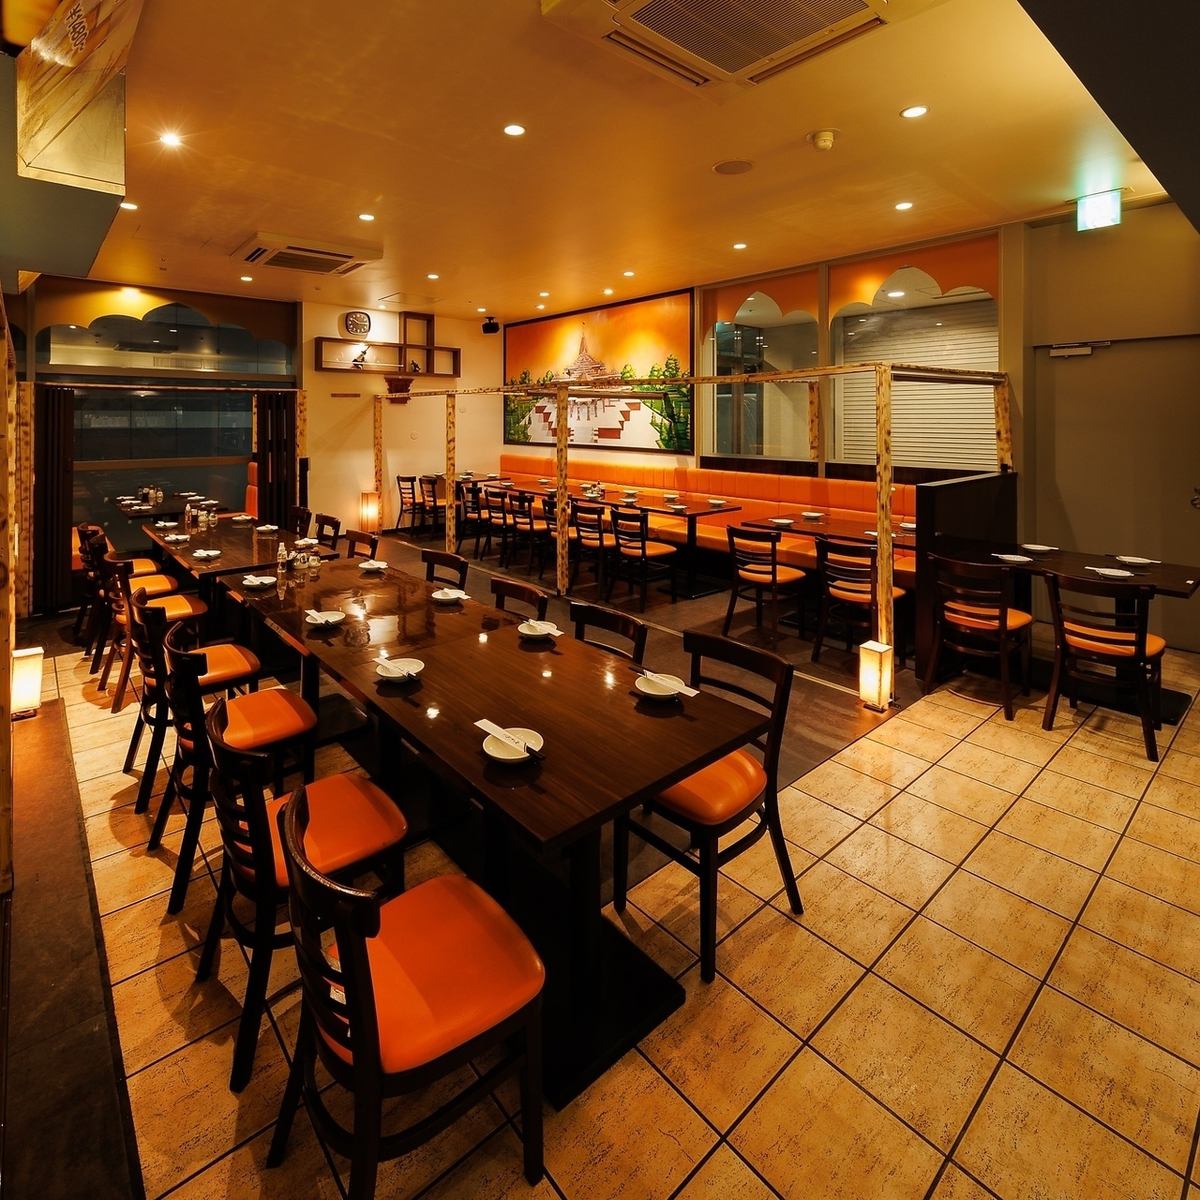 All seats are private rooms! Private rooms can accommodate from 2 to 180 people